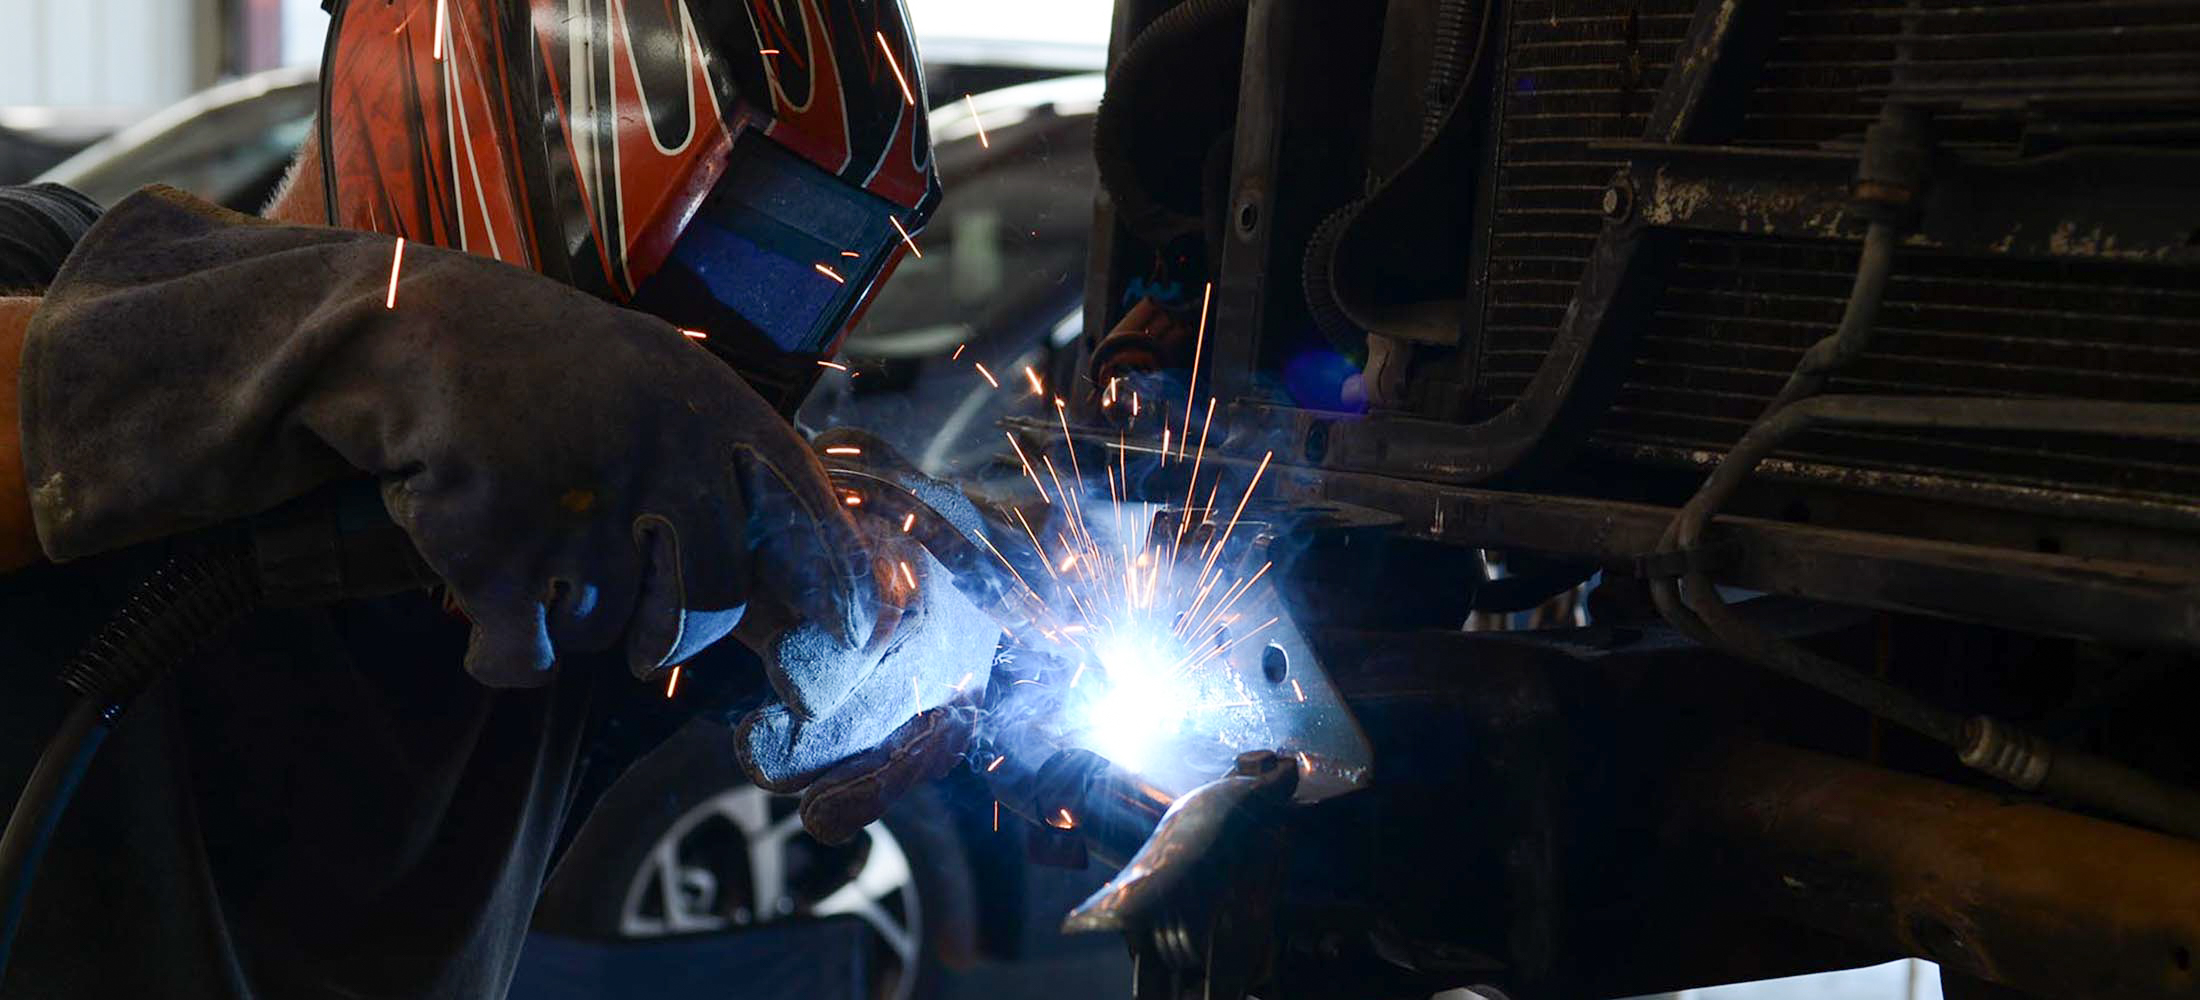 Auto body shop and collission repair is part craftmanship and part art. Welding is an integral part of auto body repair, we have mastered auto welding.